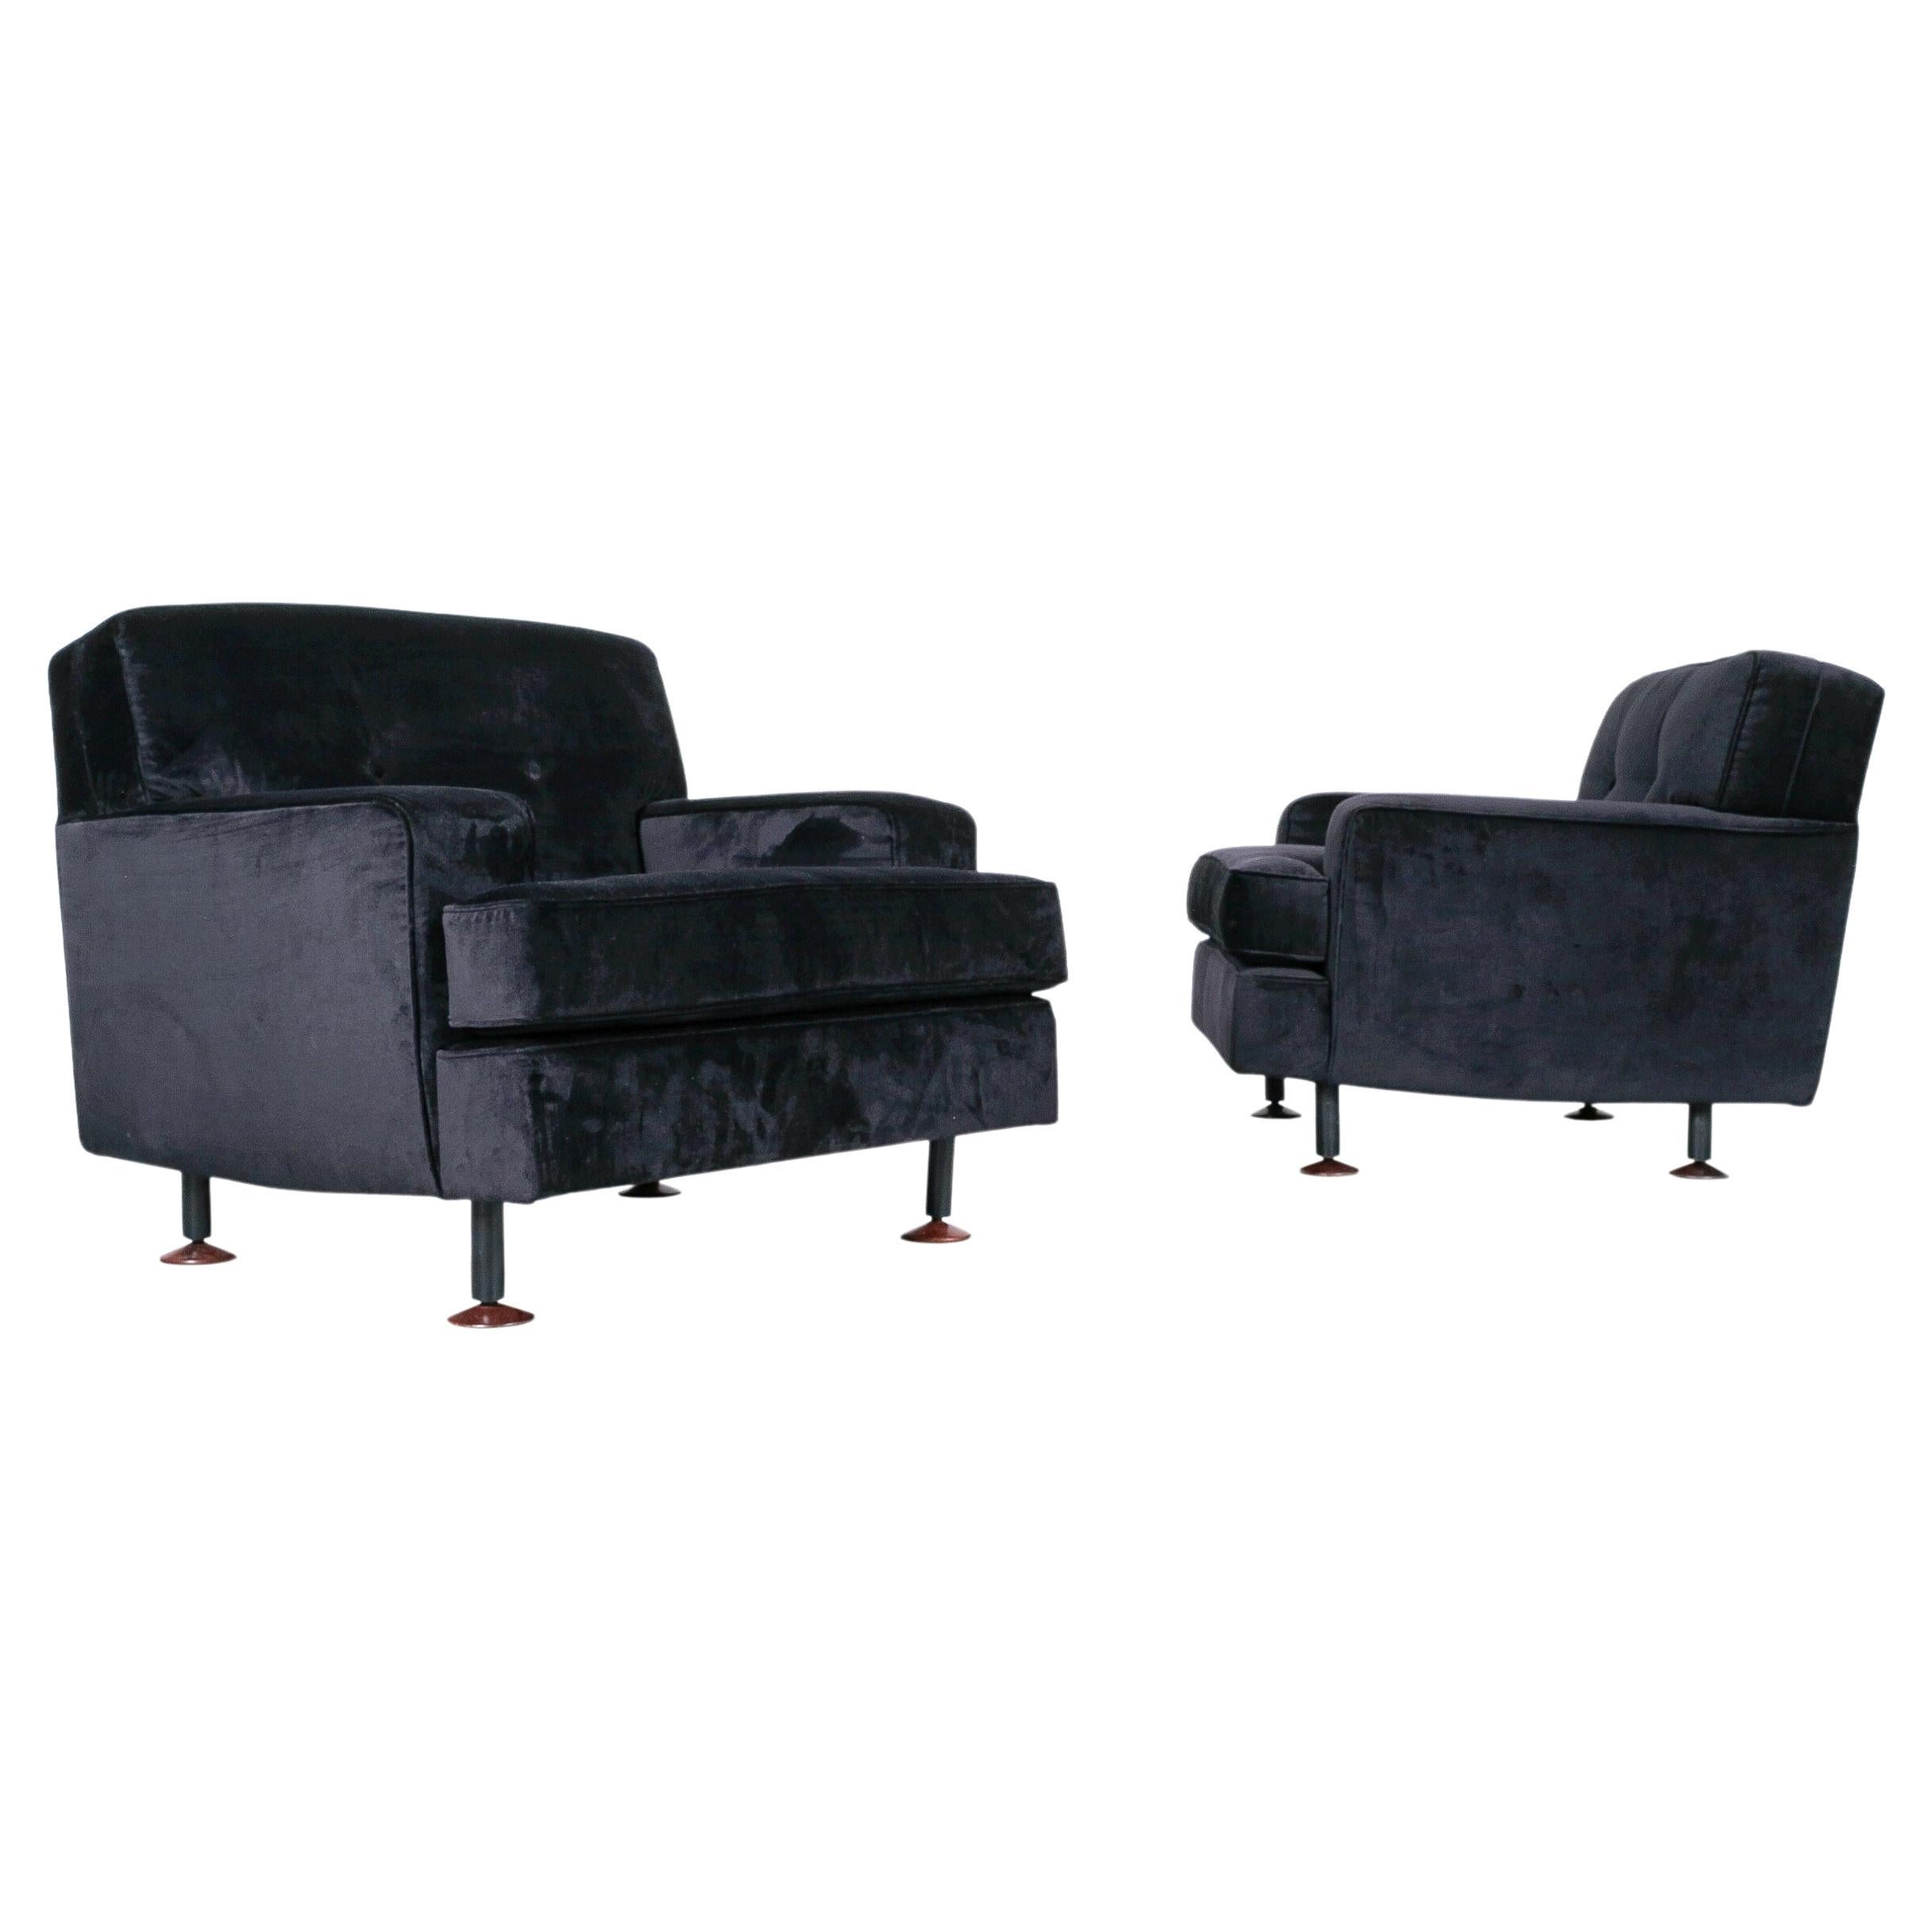 Marco Zanuso 'Square' Black Velvet Chairs with Teak Feet, Italy, circa 1955 For Sale